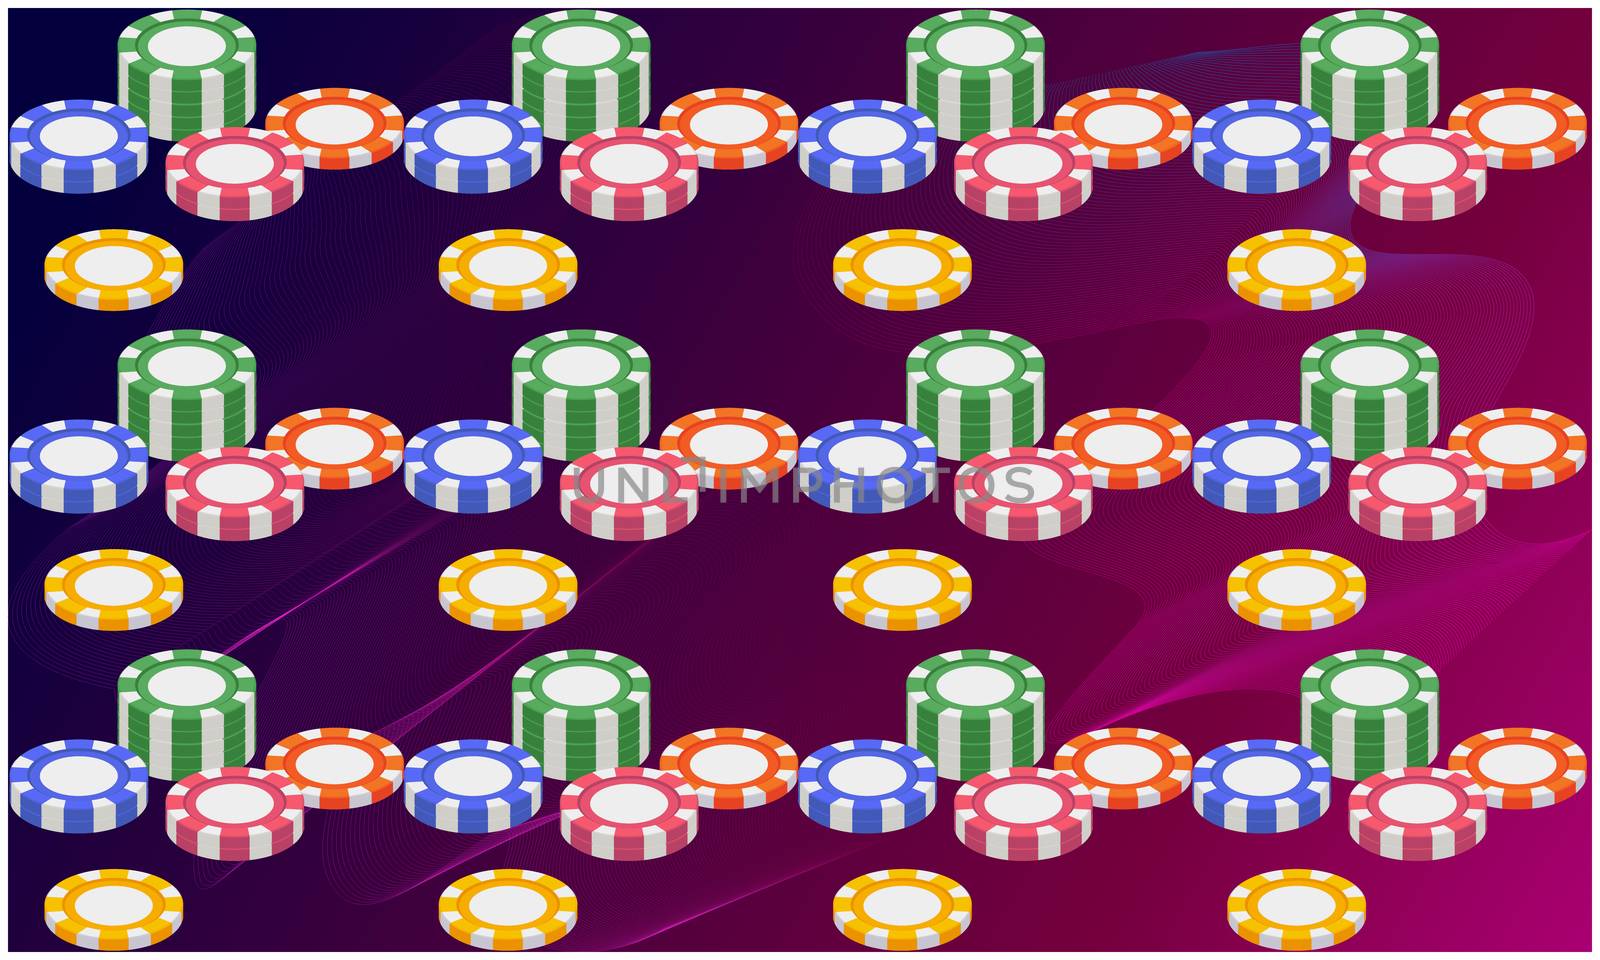 digital textile design of poker coins on abstract background by aanavcreationsplus